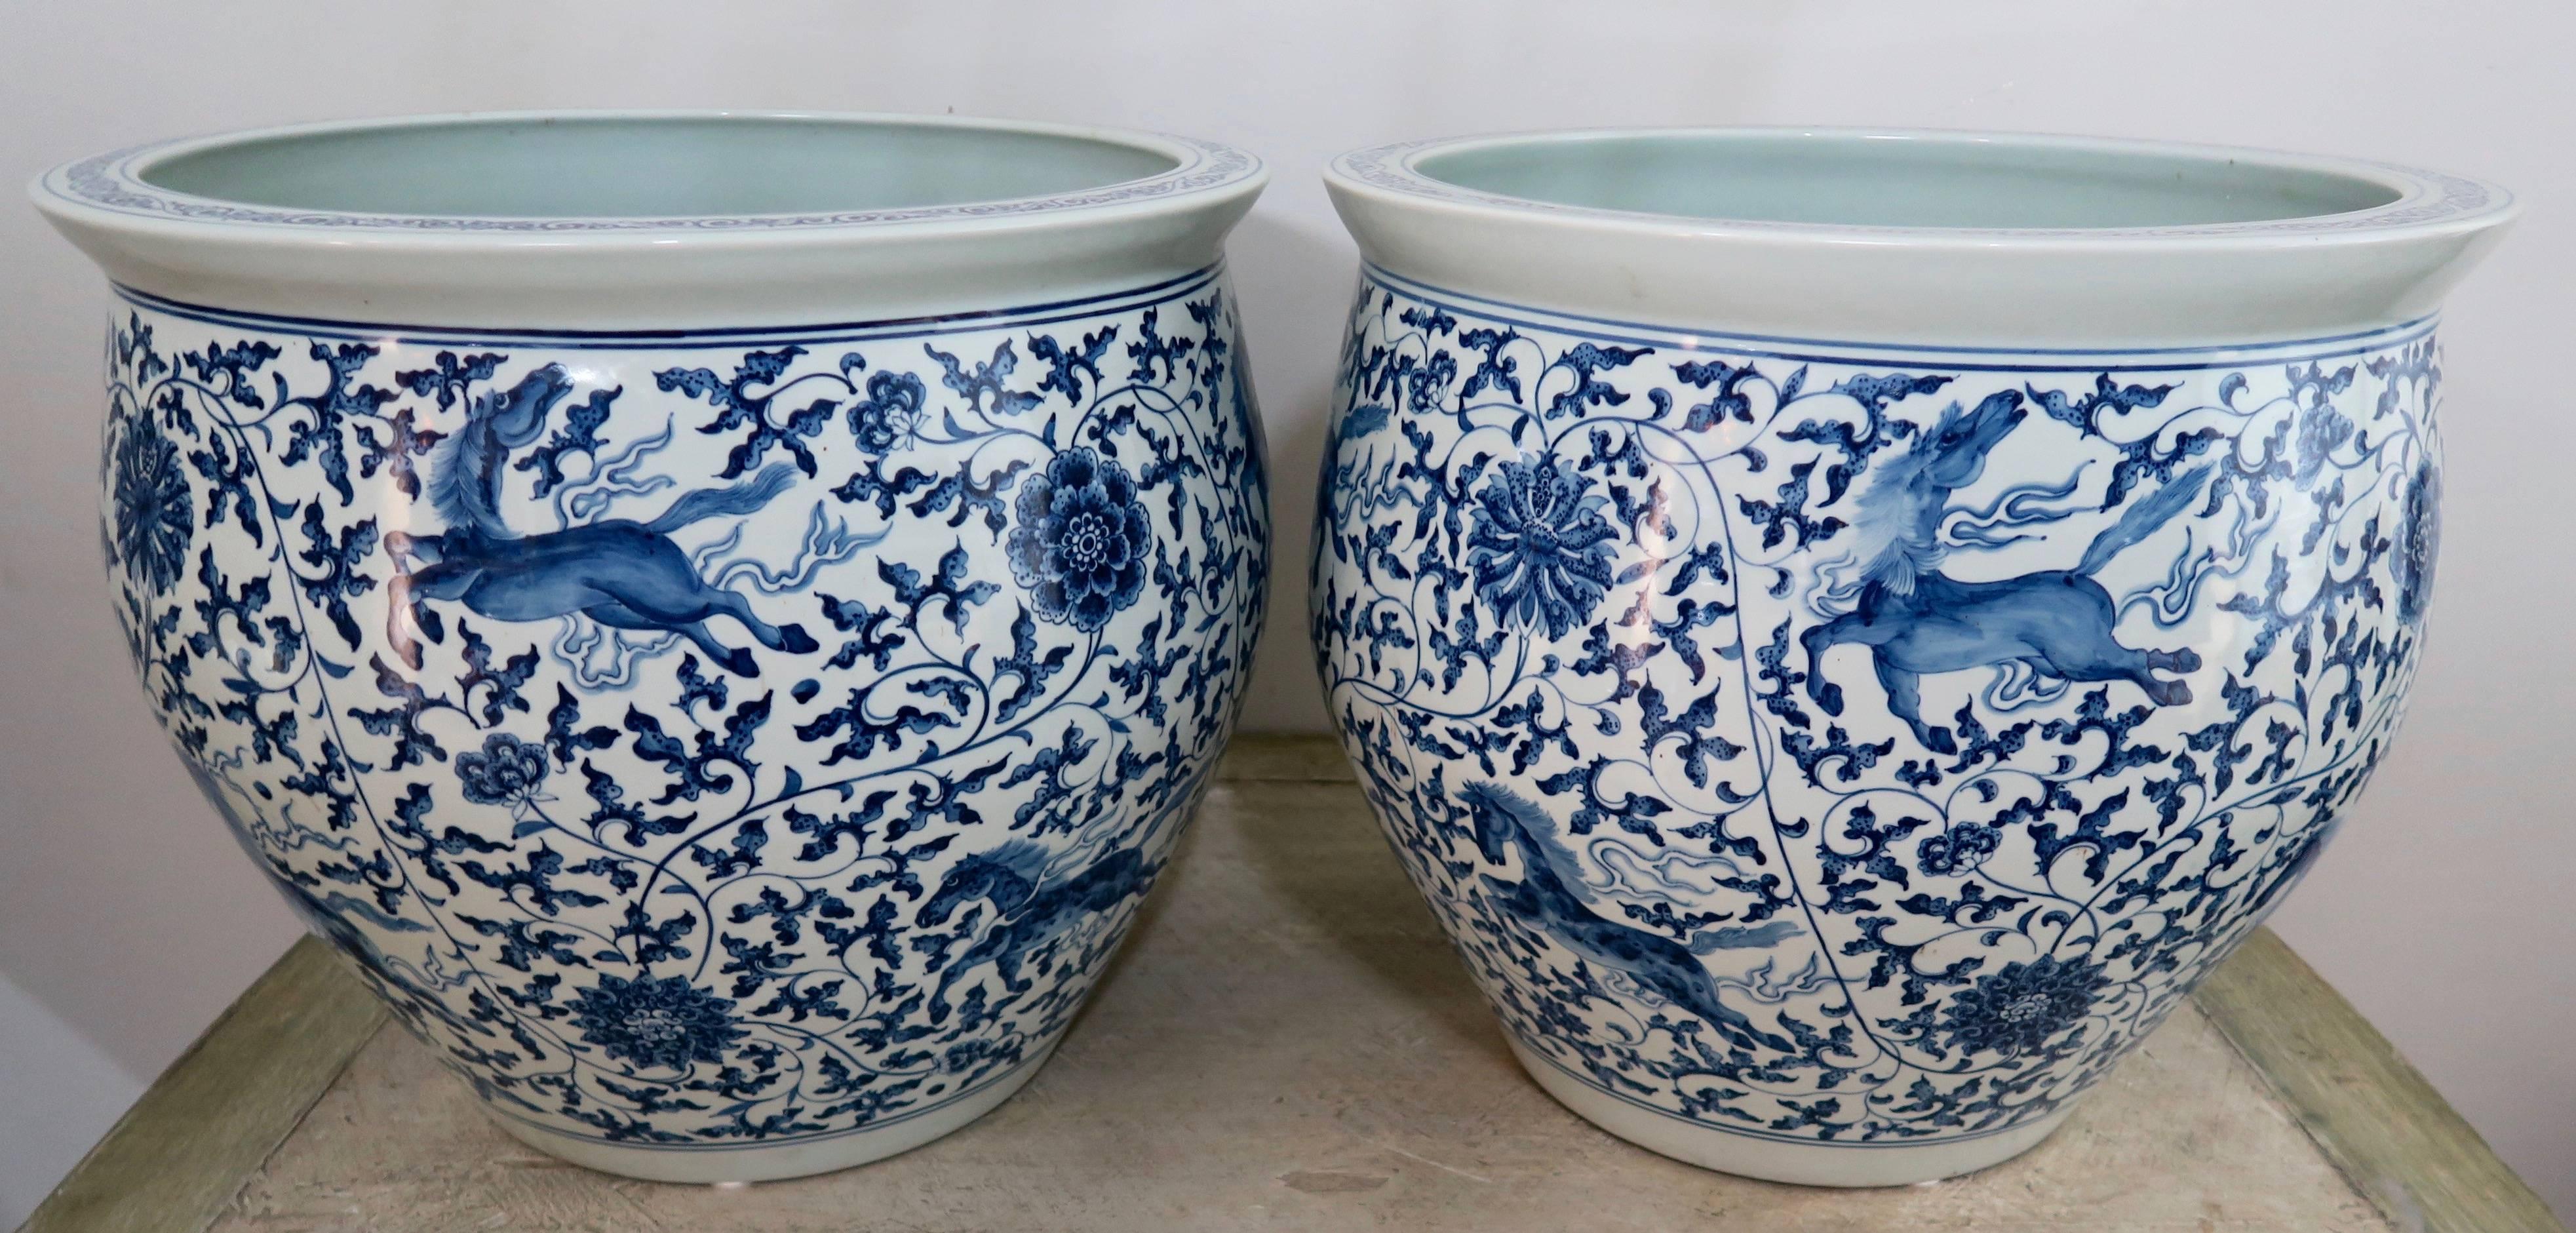 20th Century Chinese Porcelain Blue and White Planters, Pair